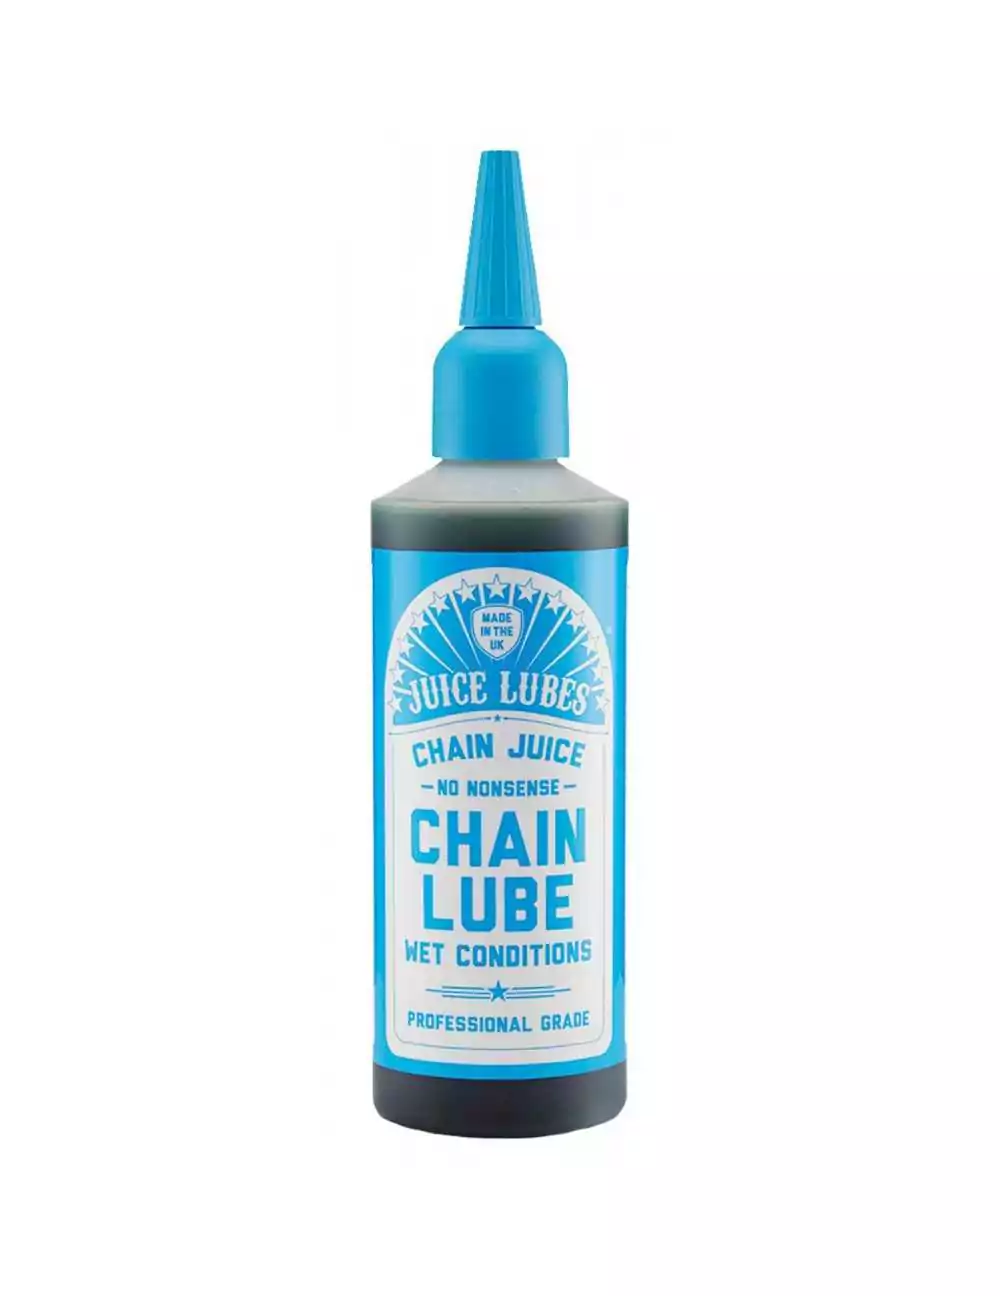 Lubrifiant chaine juice lubes conditions humides 130 ml